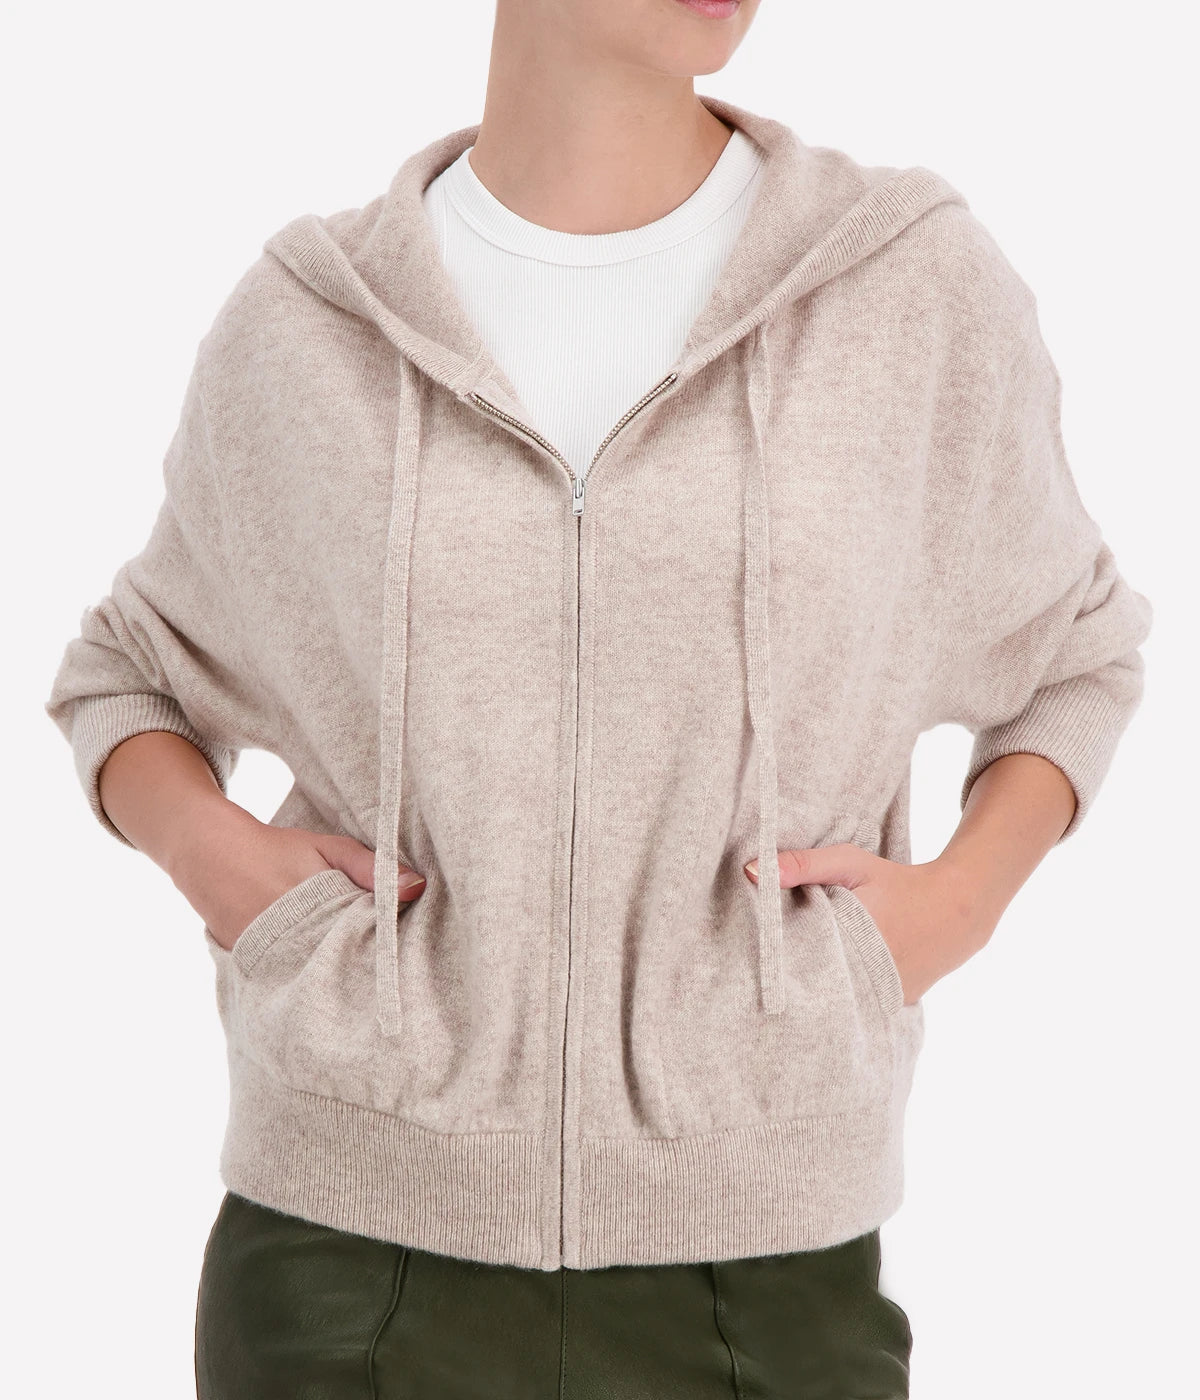 Cashmere Cropped Zip Hoodie in Sand Heather